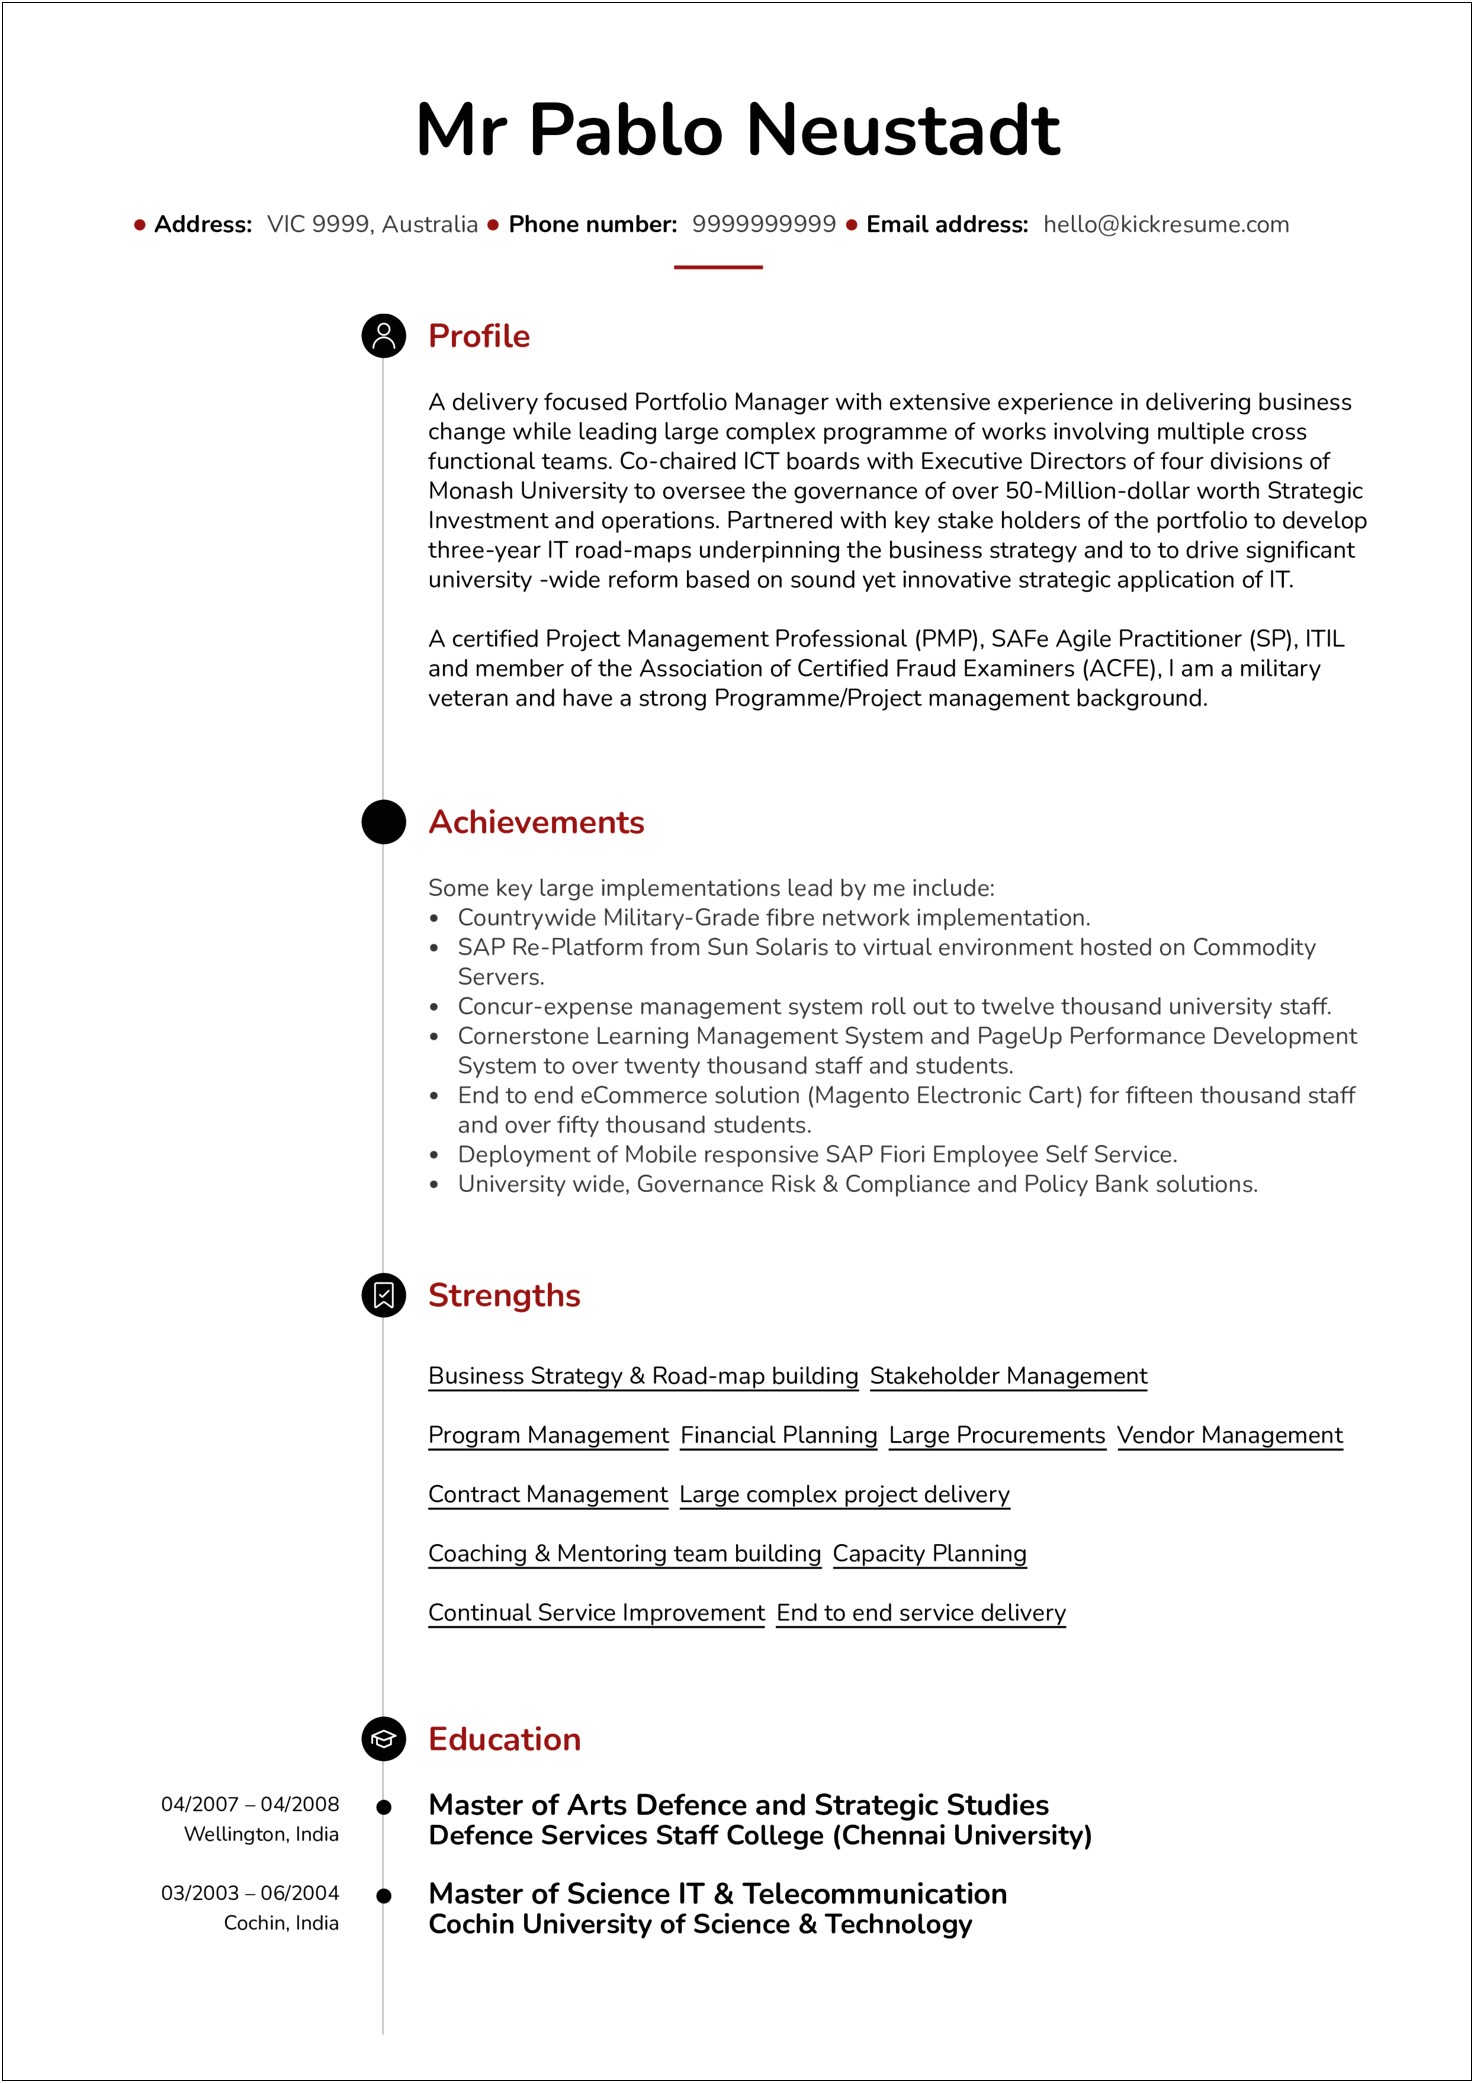 Cyber Operations Manager Resume Sample